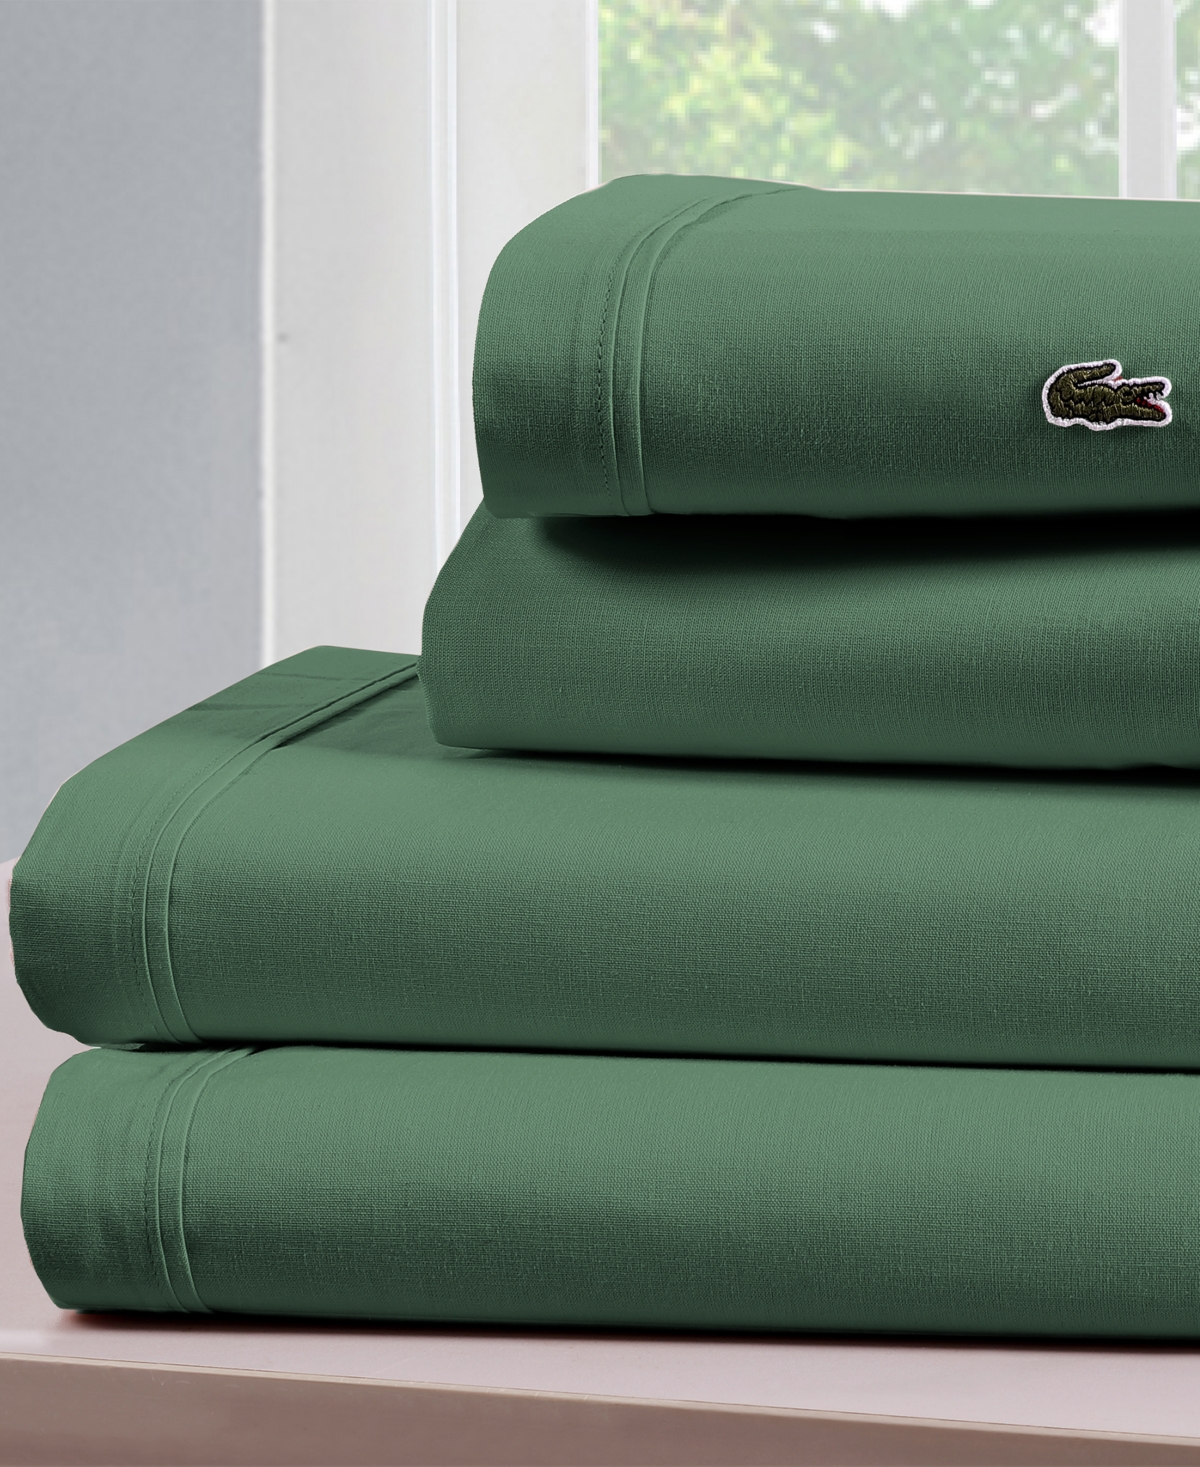 Lacoste Home Solid Cotton Percale Sheet Set, Queen In Ivy Green